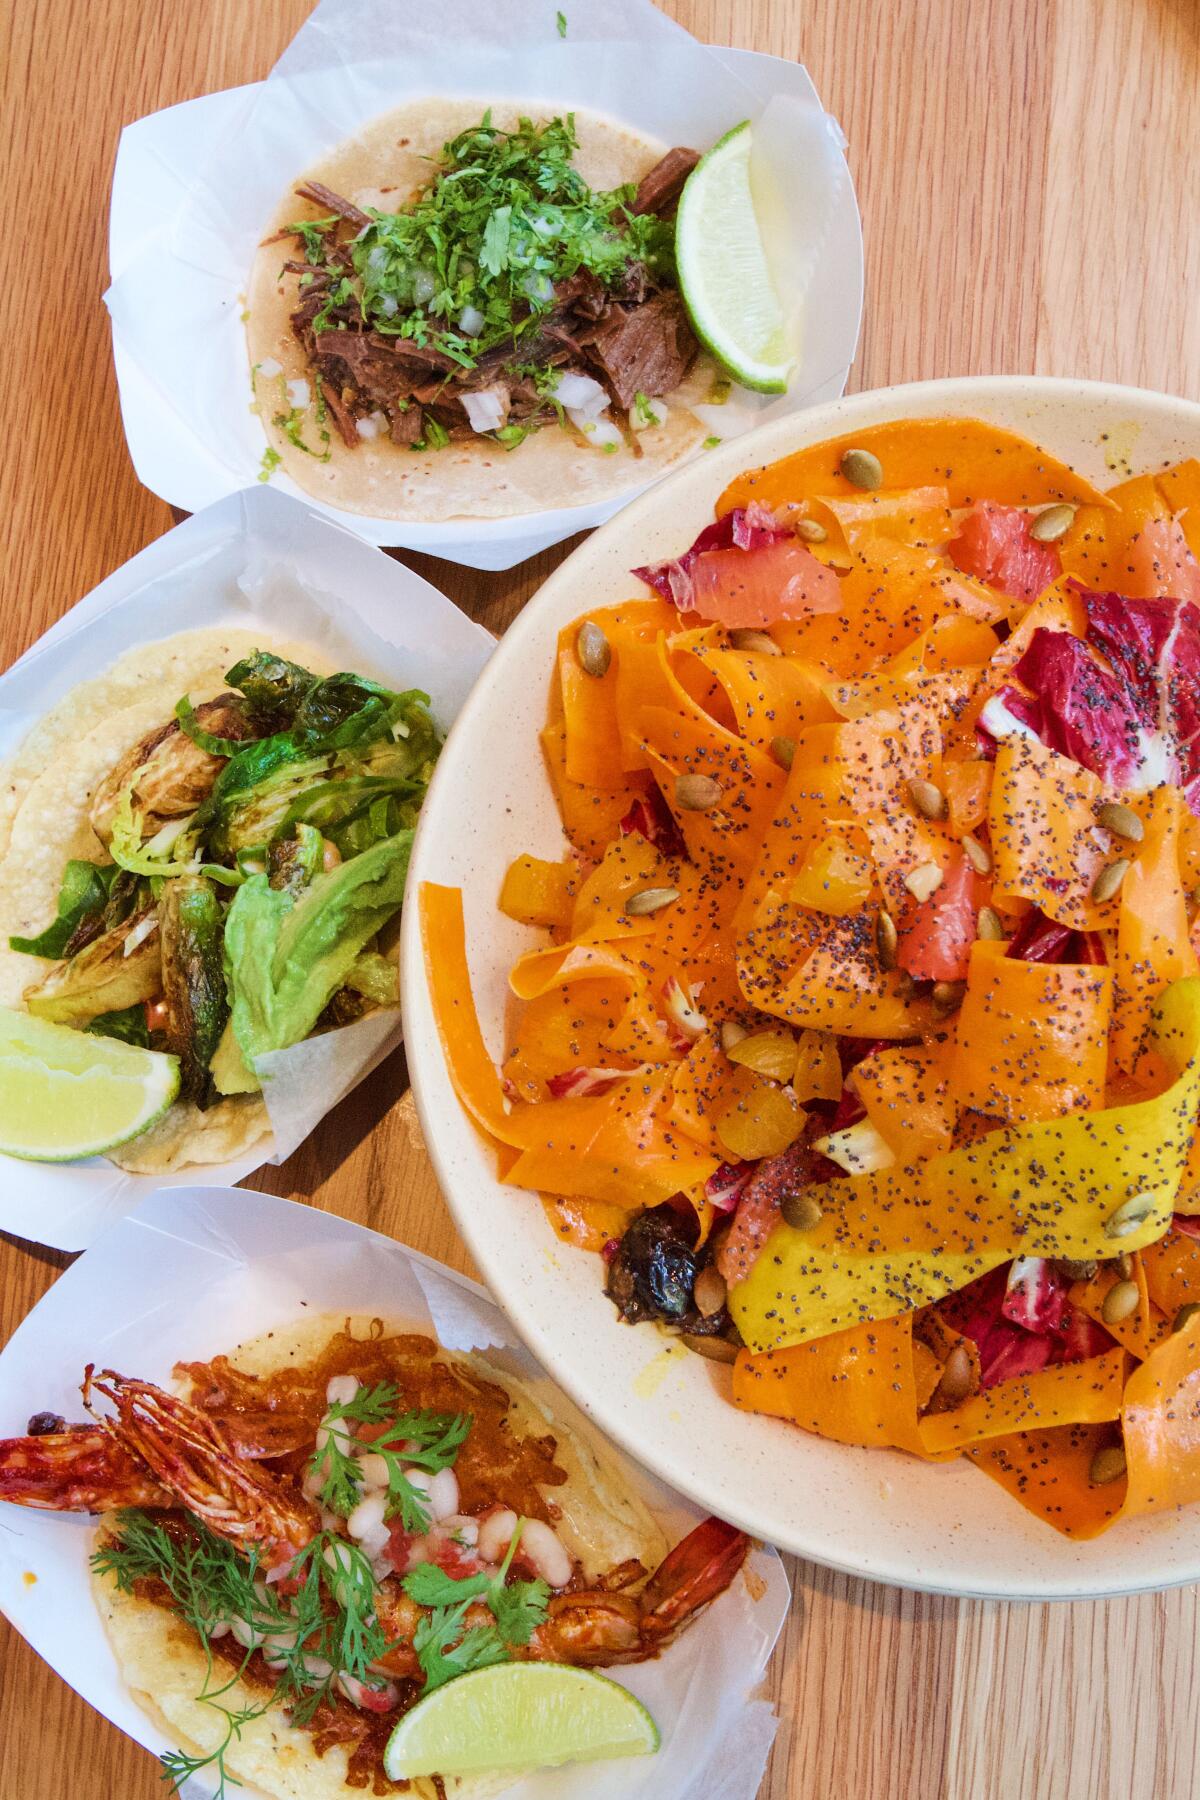 An overhead photo of a bowl of carrot salad and tacos: shrimp, suadero, and Brussels sprouts from Enrique Olvera's Atla